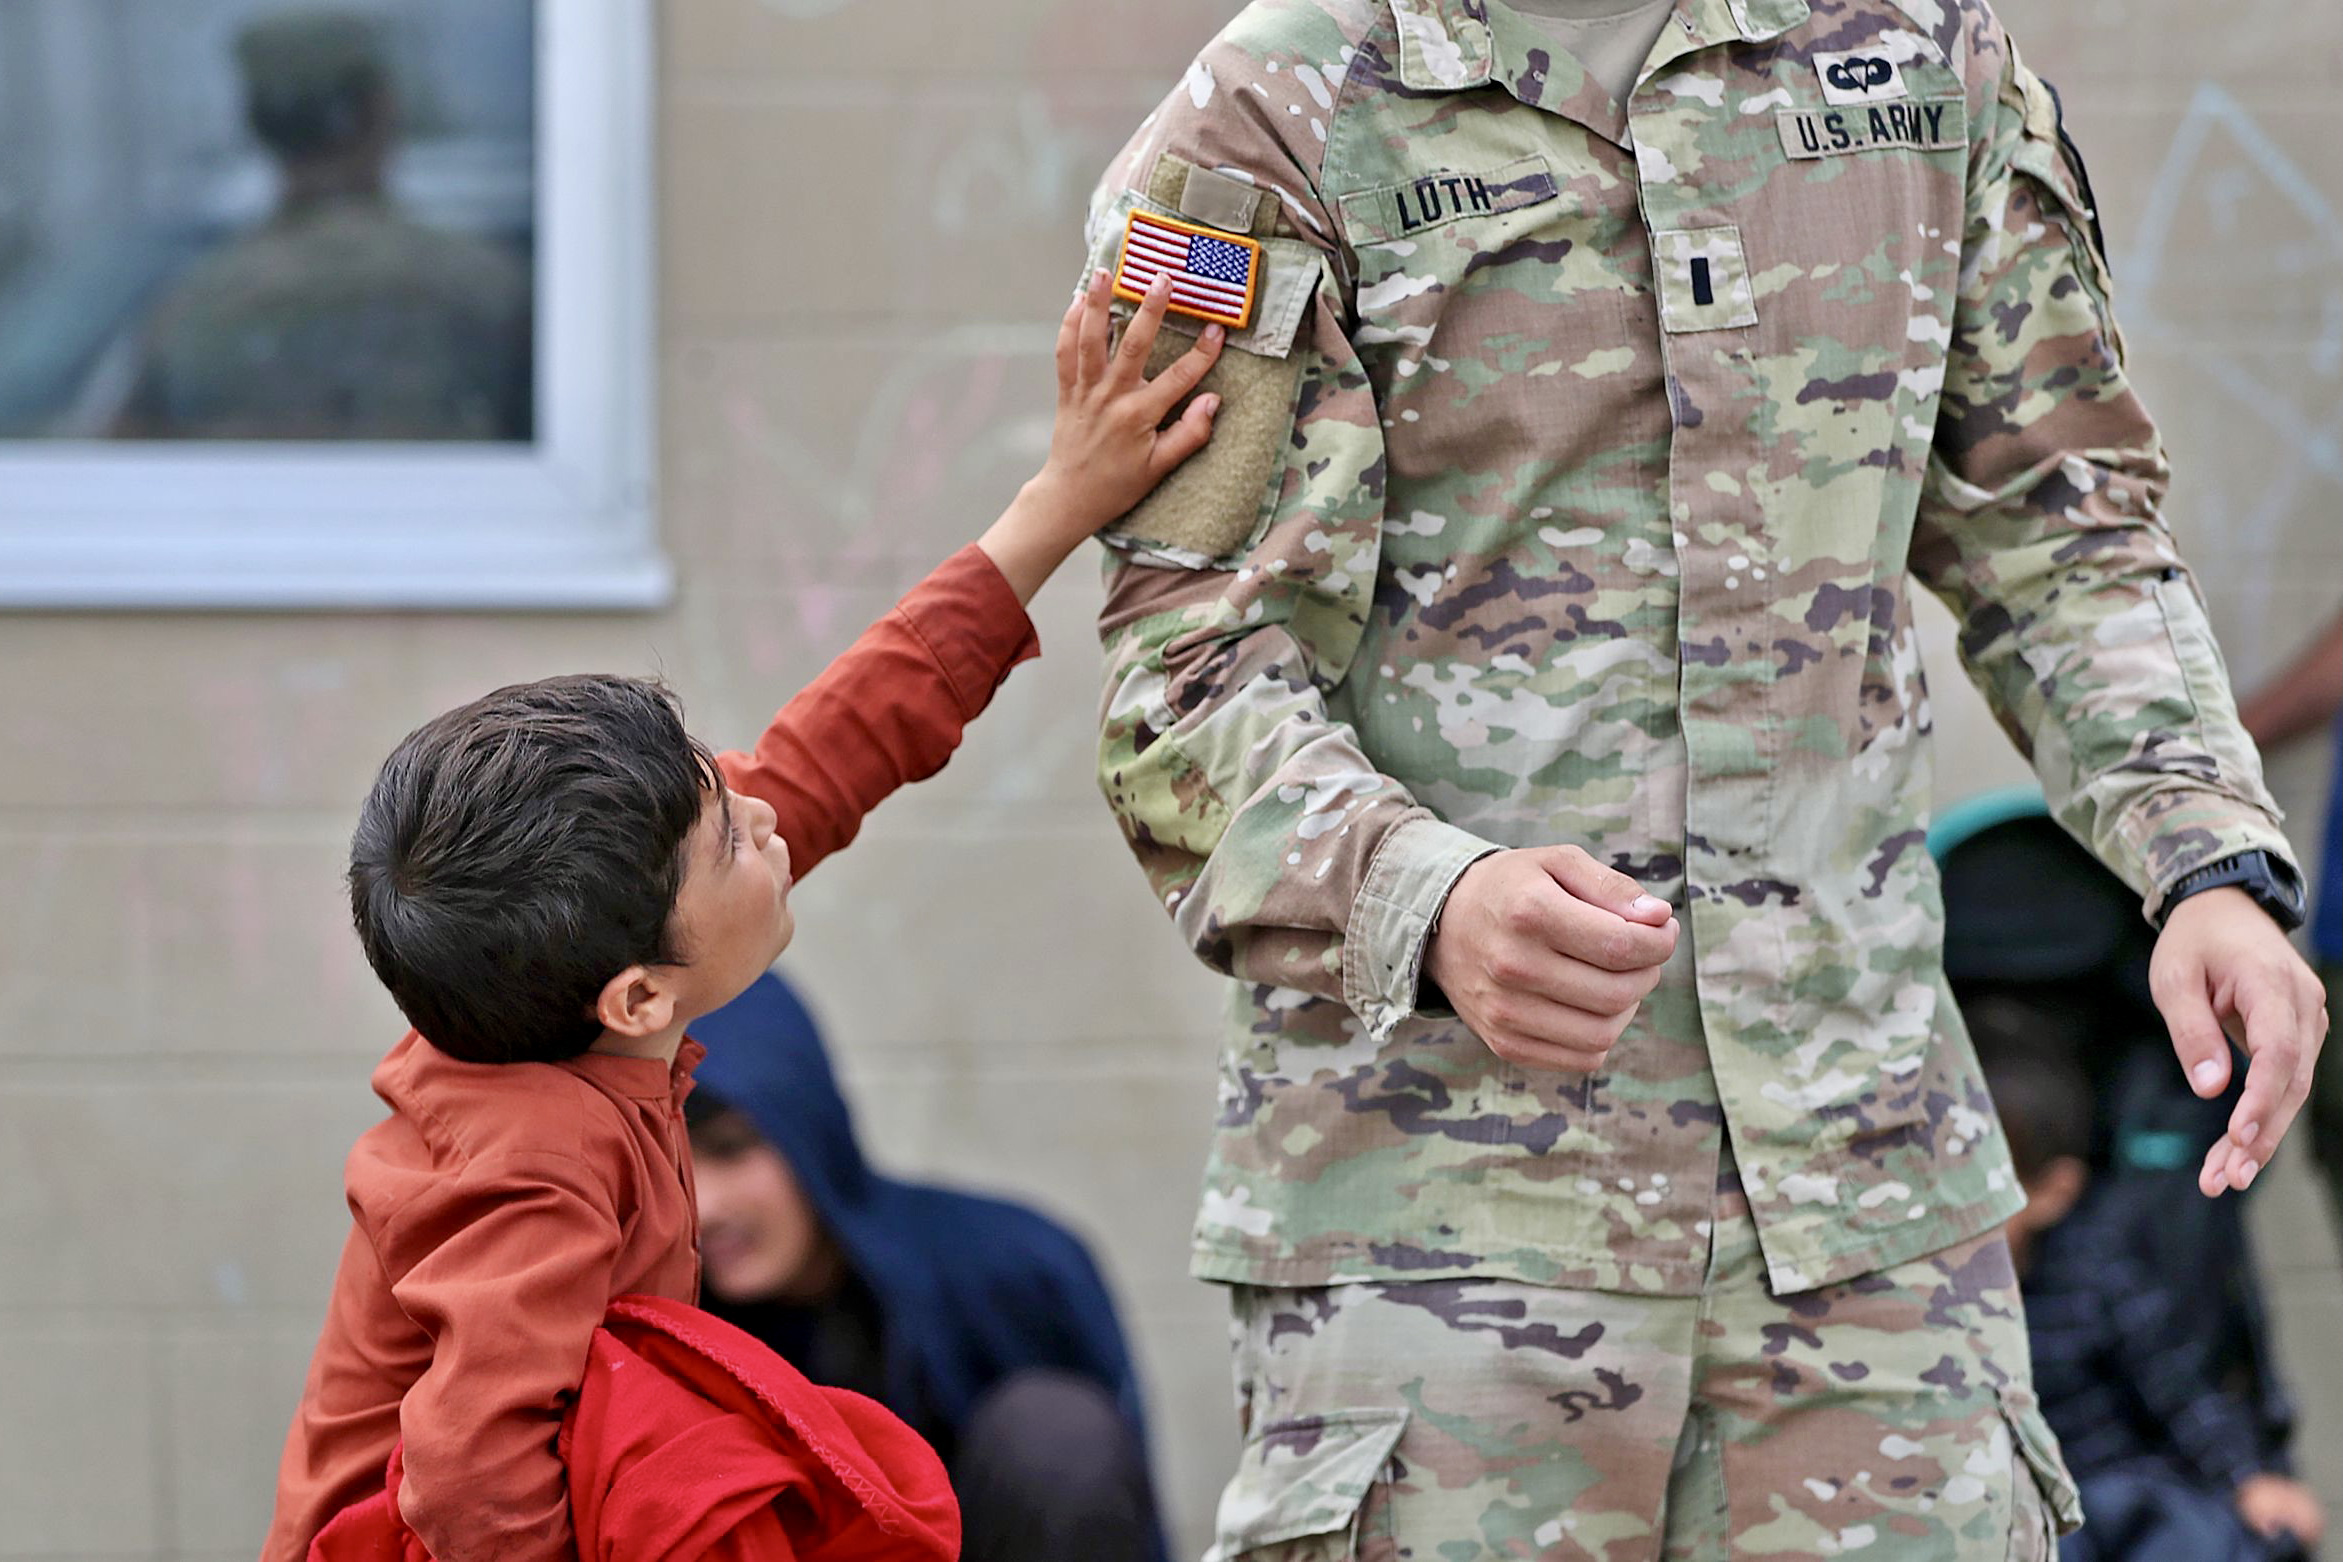 Afghan child and U.S. soldier at Camp Atterbury